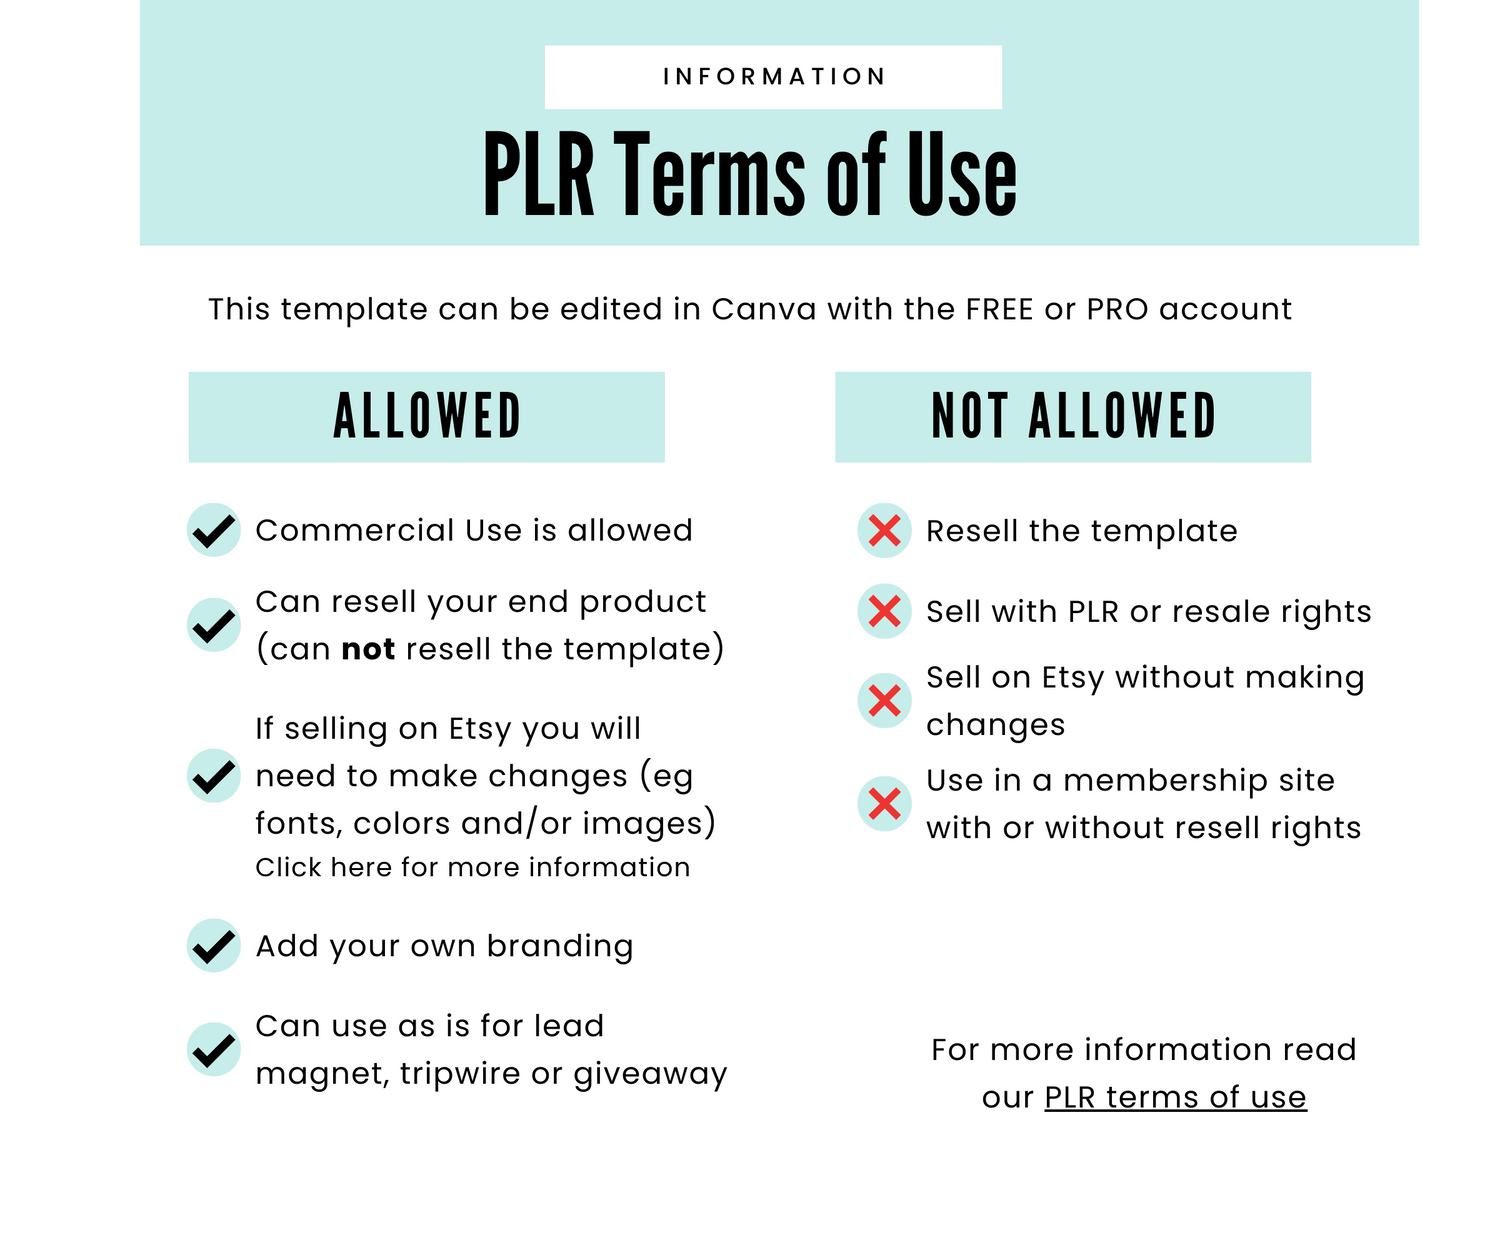 PLR Terms of Use what is allowed and what is not allowed